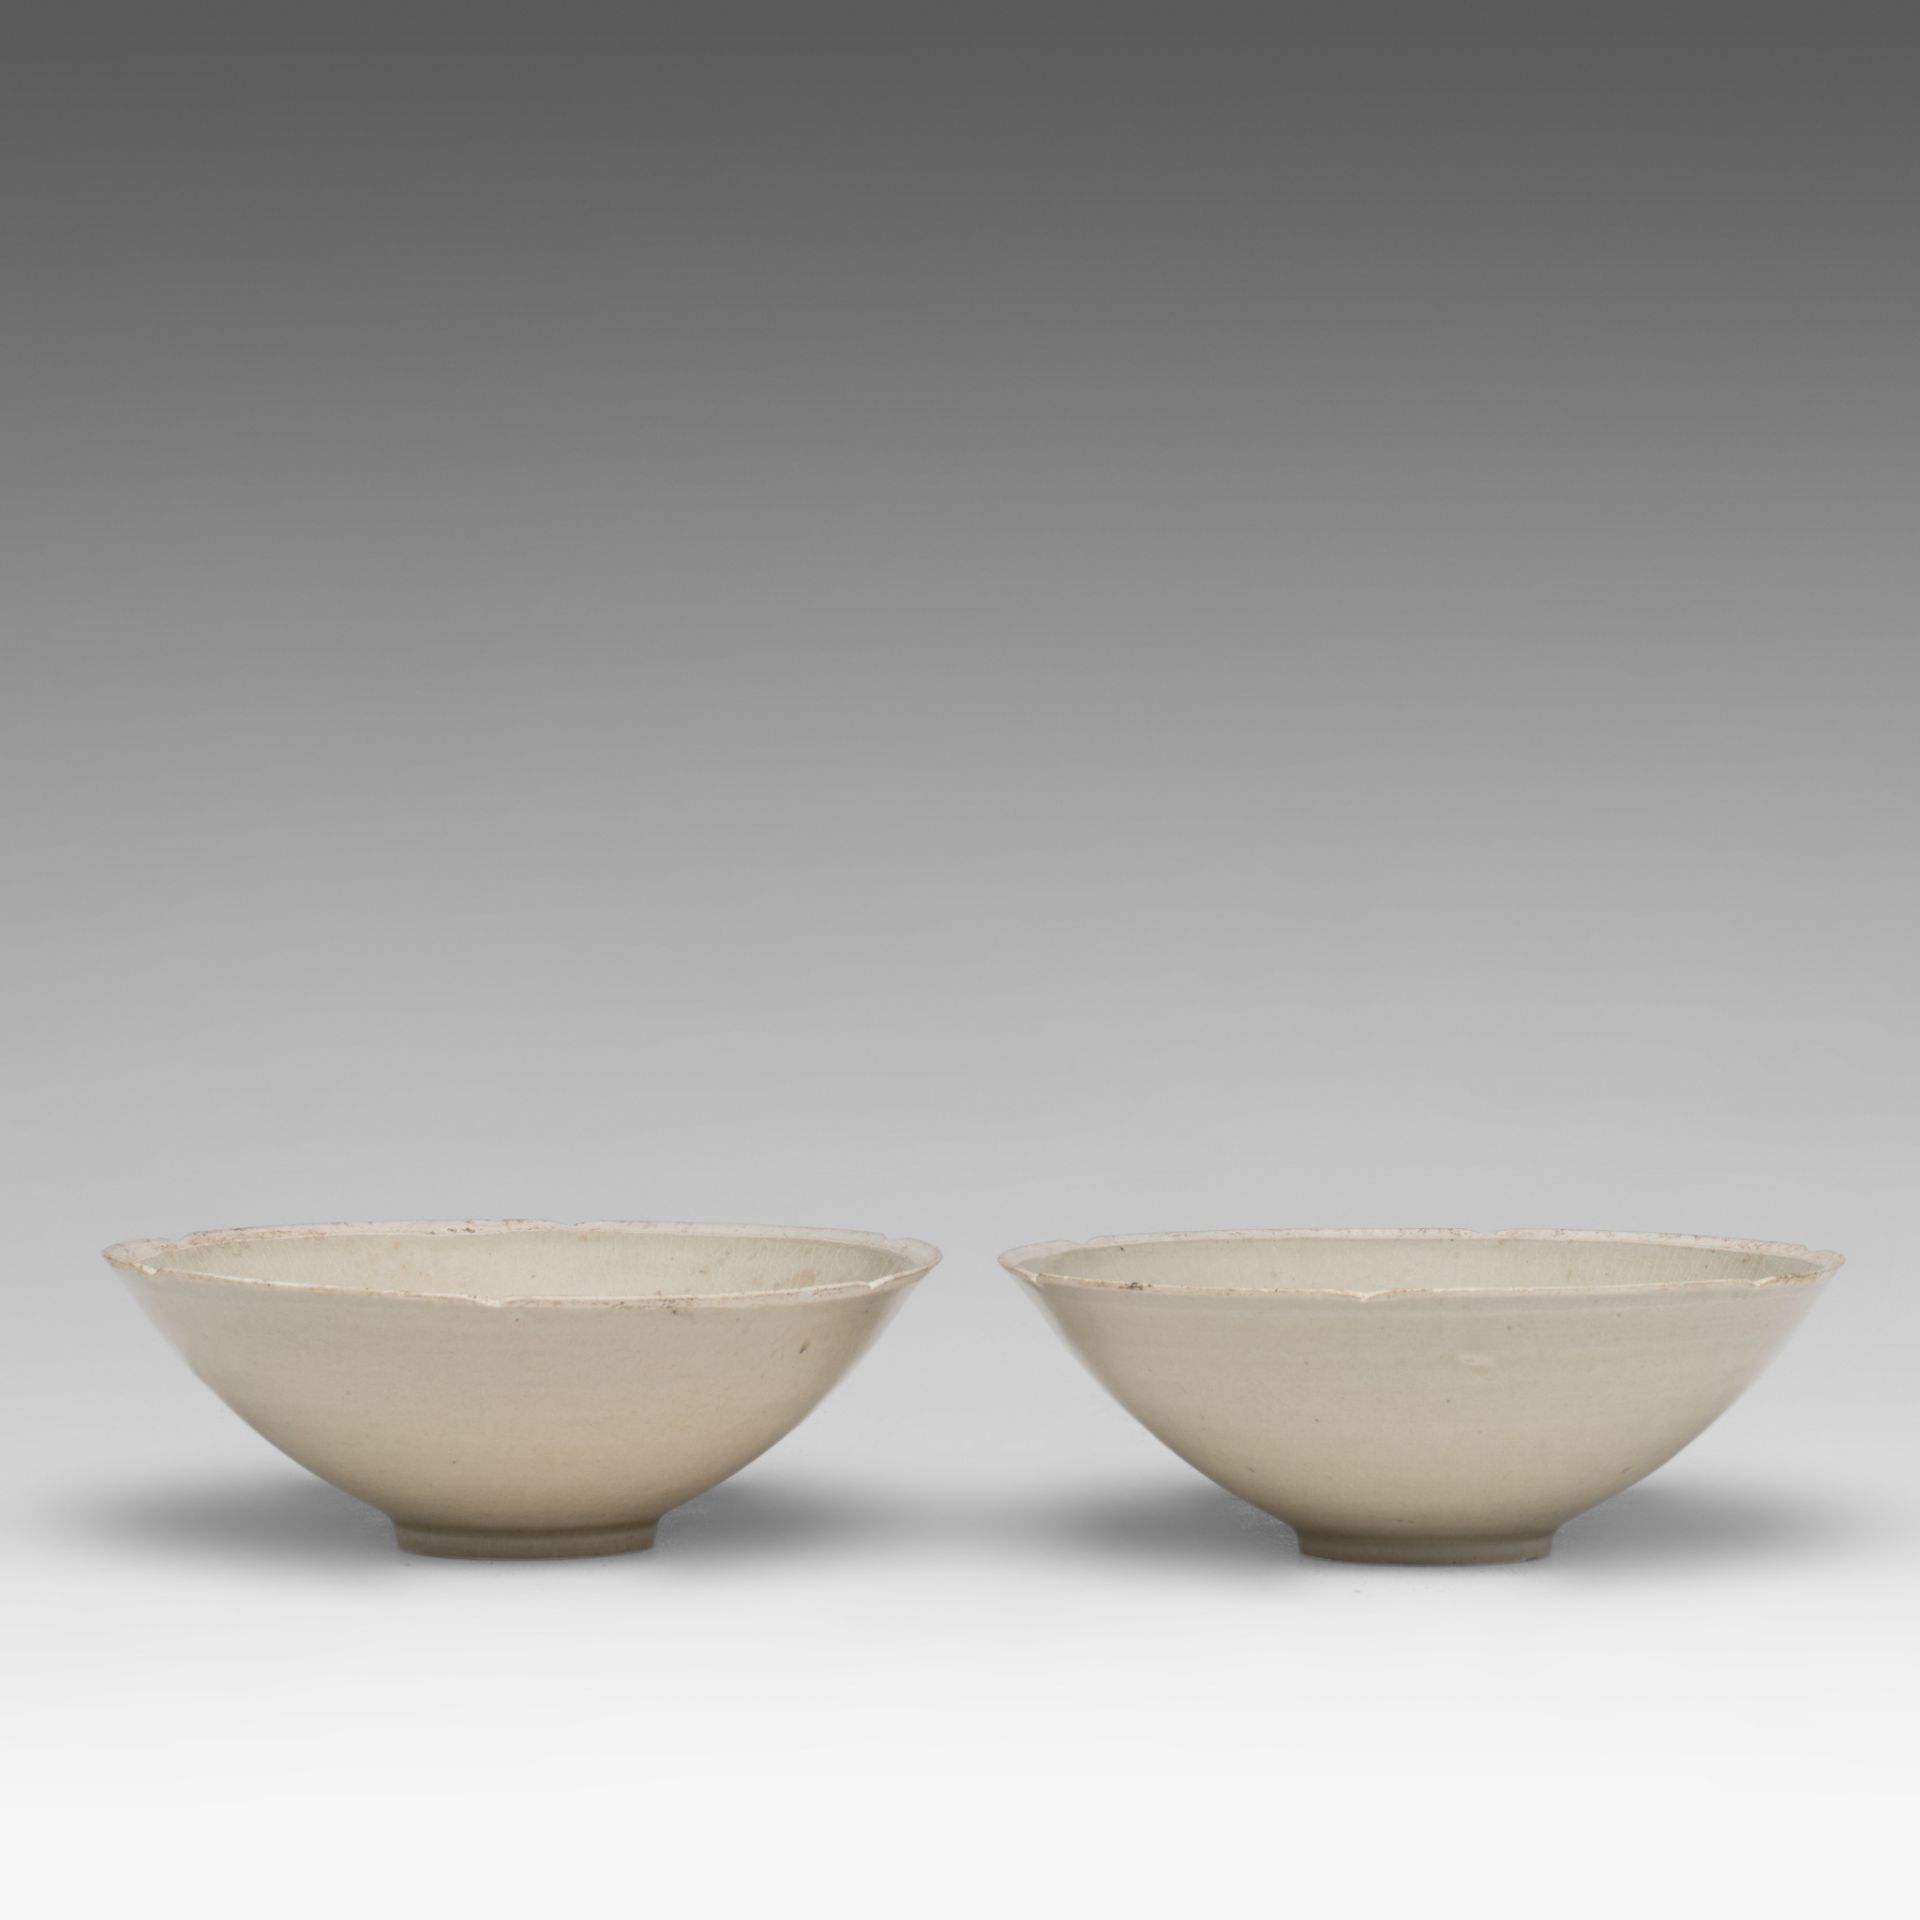 A pair of Chinese incised qingbai bowls, Song-Ming dynasty, dia 20 - H 7,3 cm - Image 7 of 8